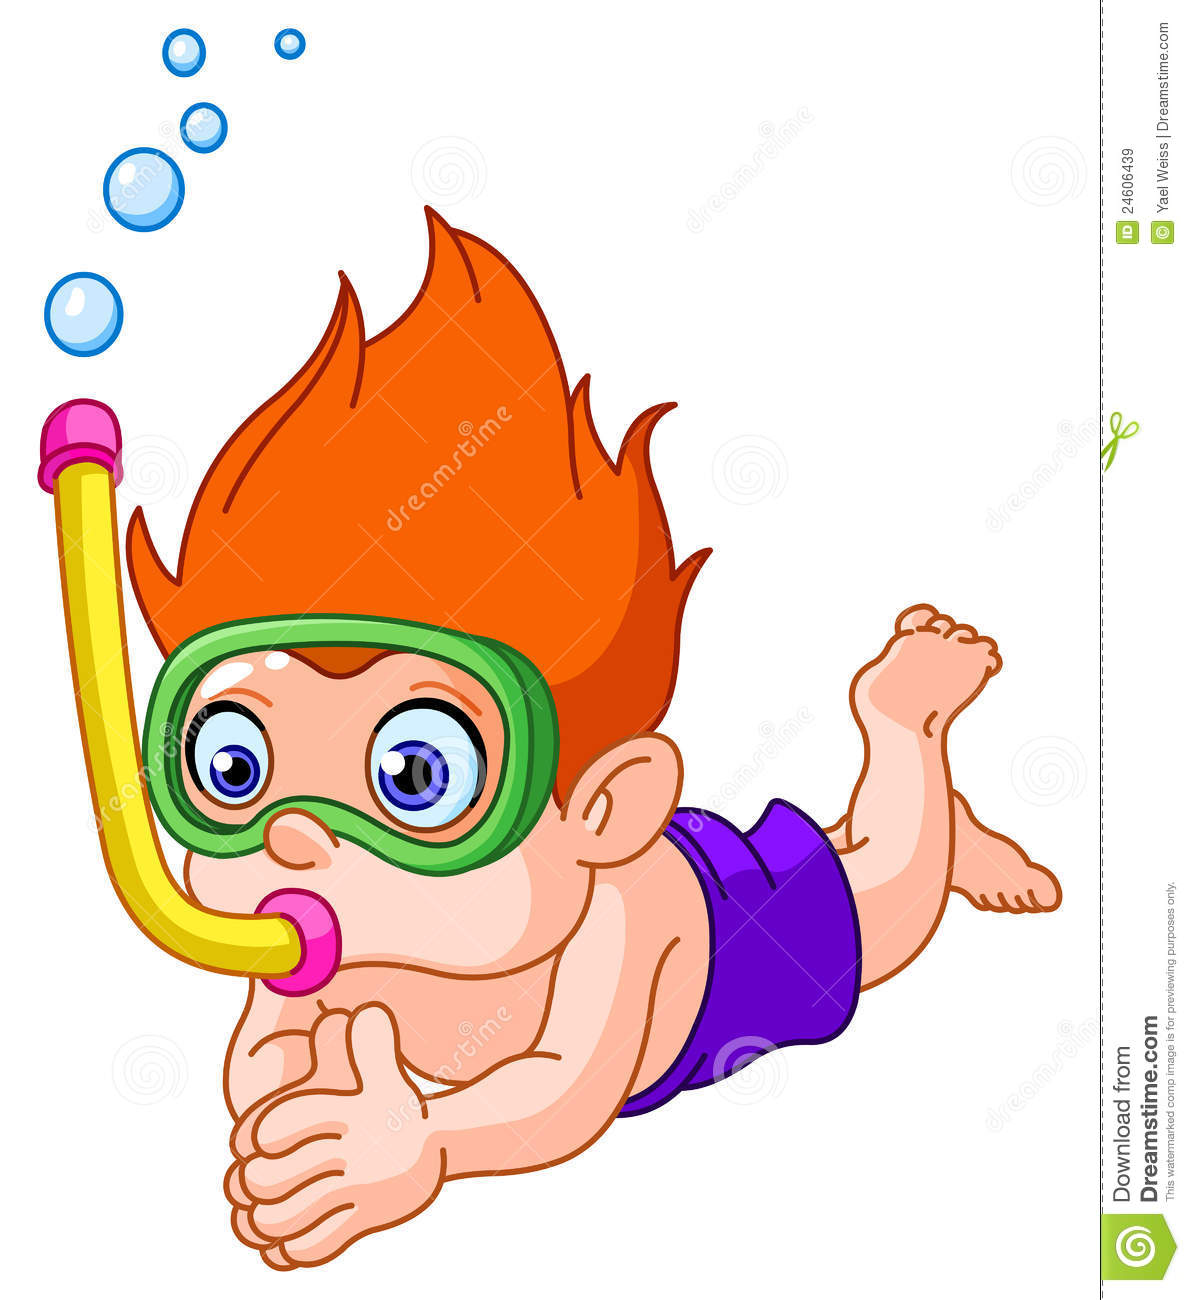 Royalty Free Stock Images  Snorkeling Kid